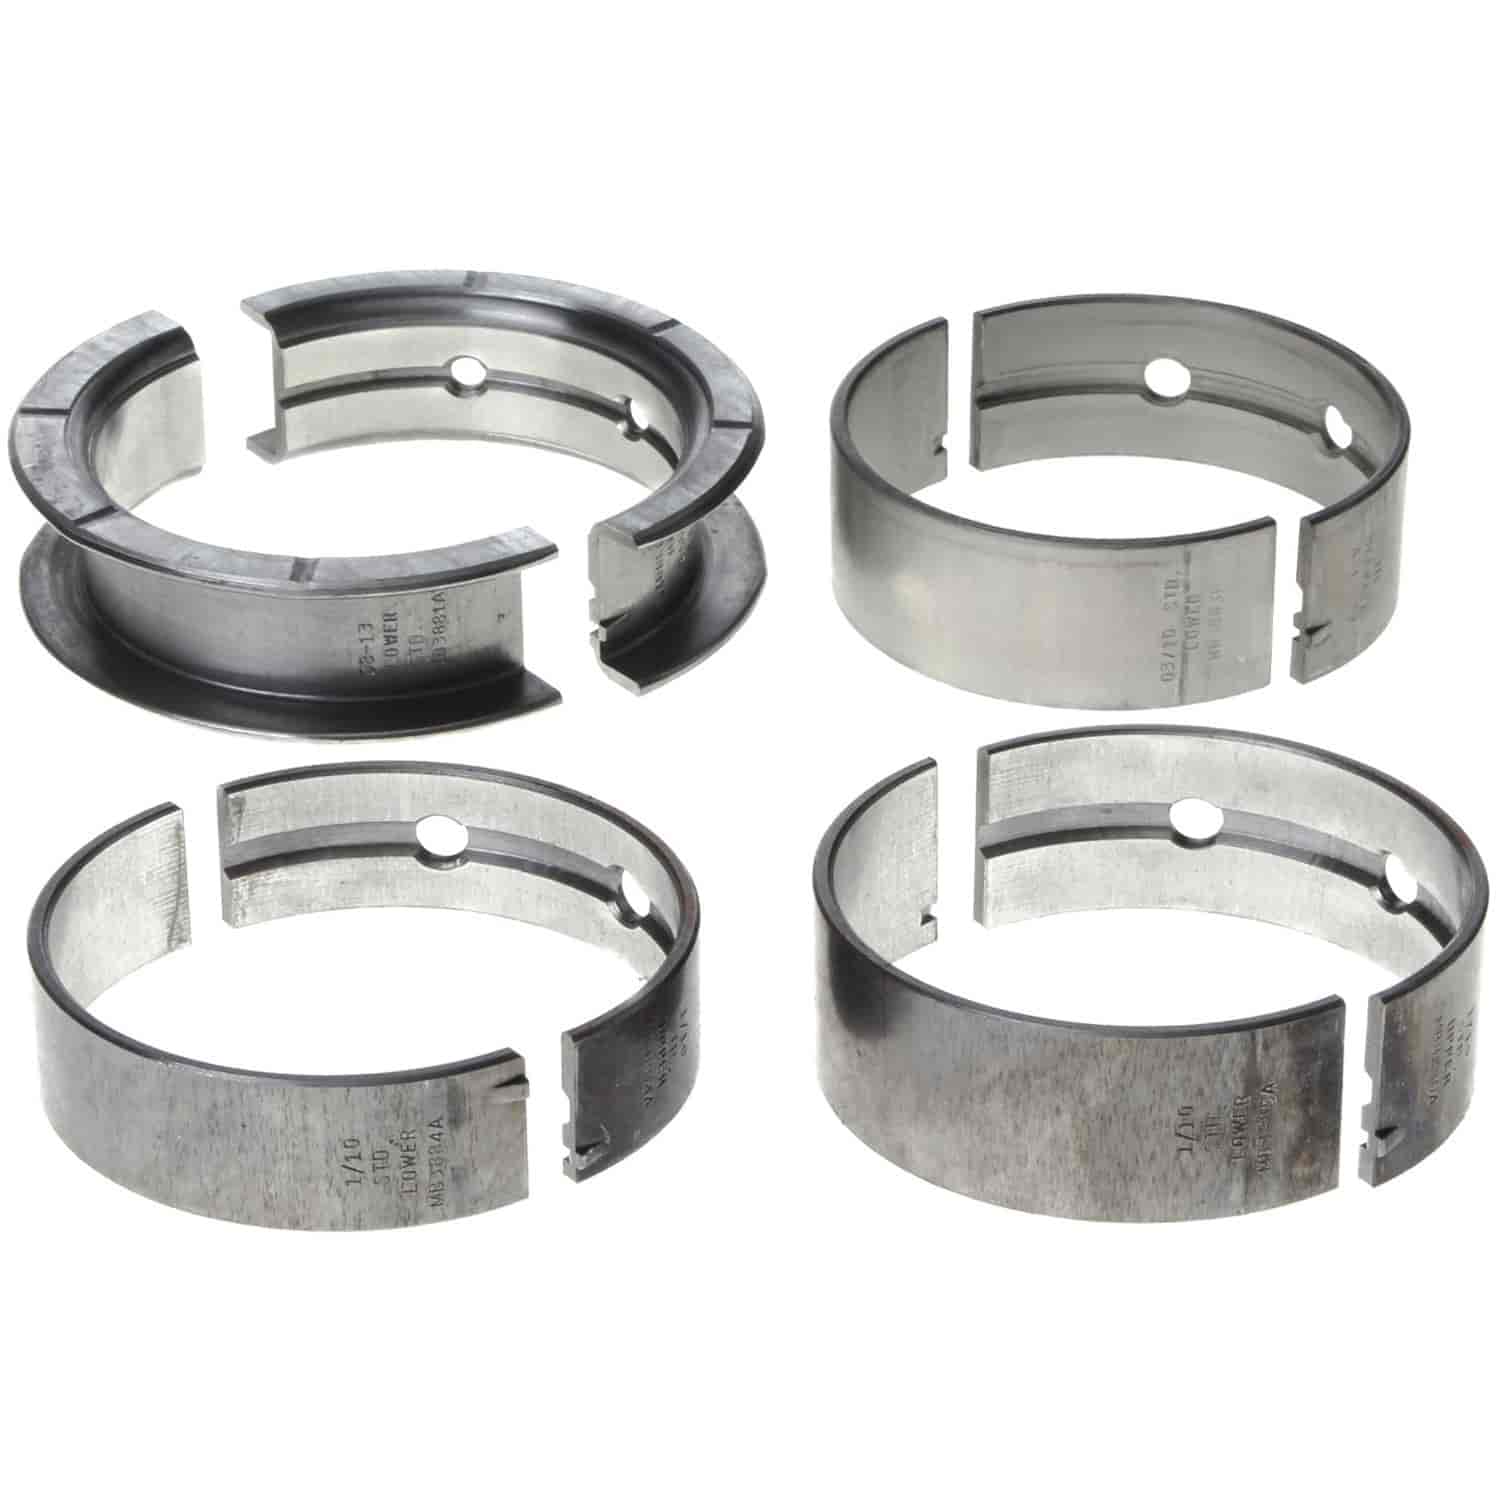 Main Bearing Set Chevy 2006-2011 V6 3.5/3.9L with Standard Size